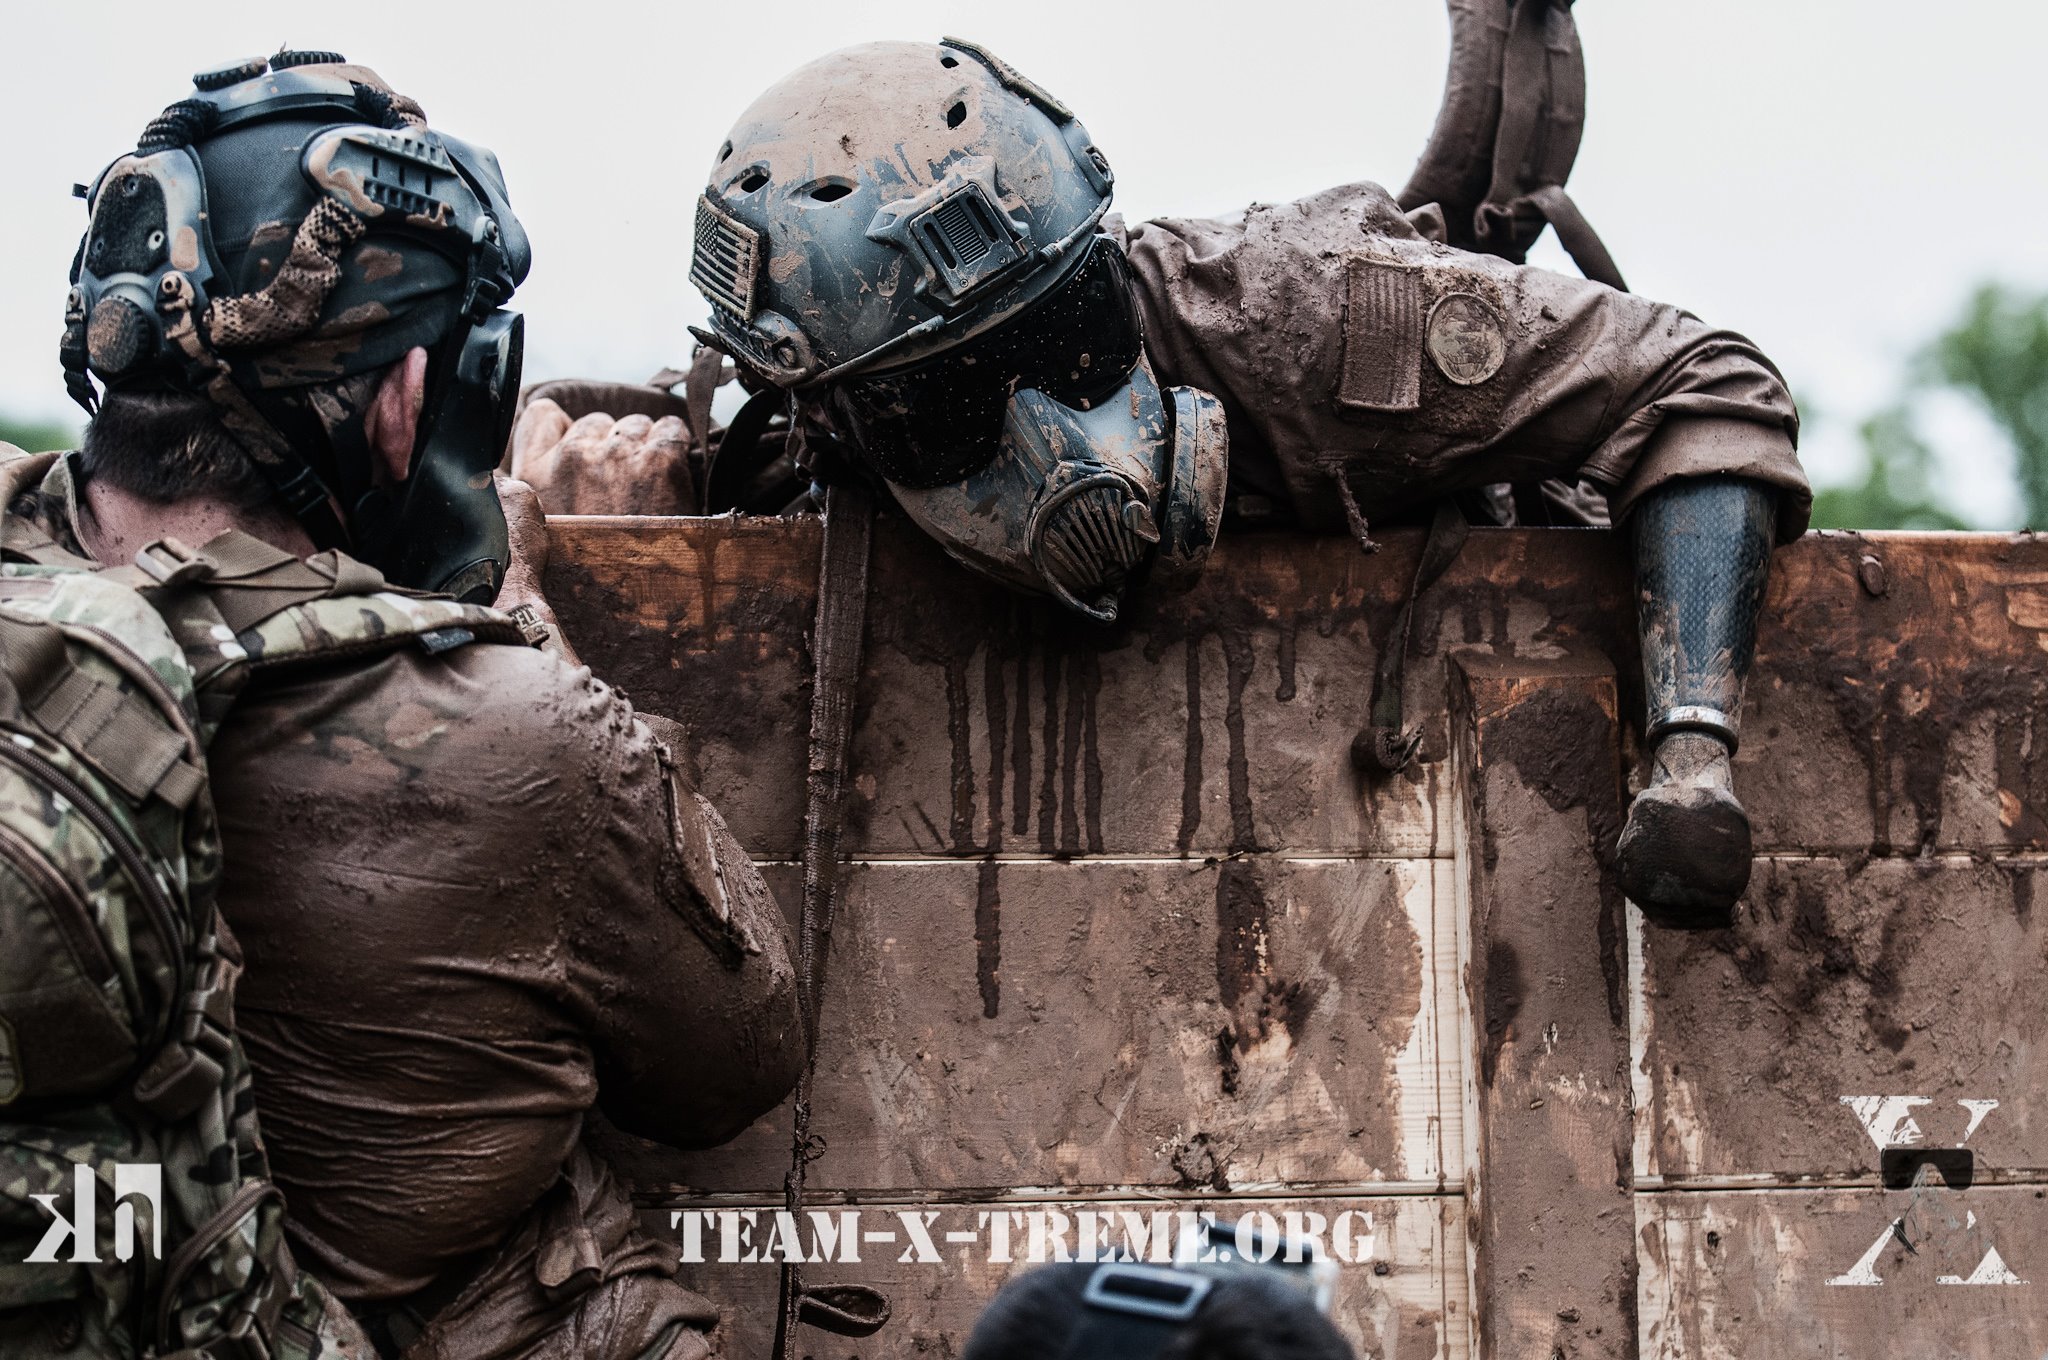 Todd Love defeating an impossible (for him…read on) obstacle in The Spartan...